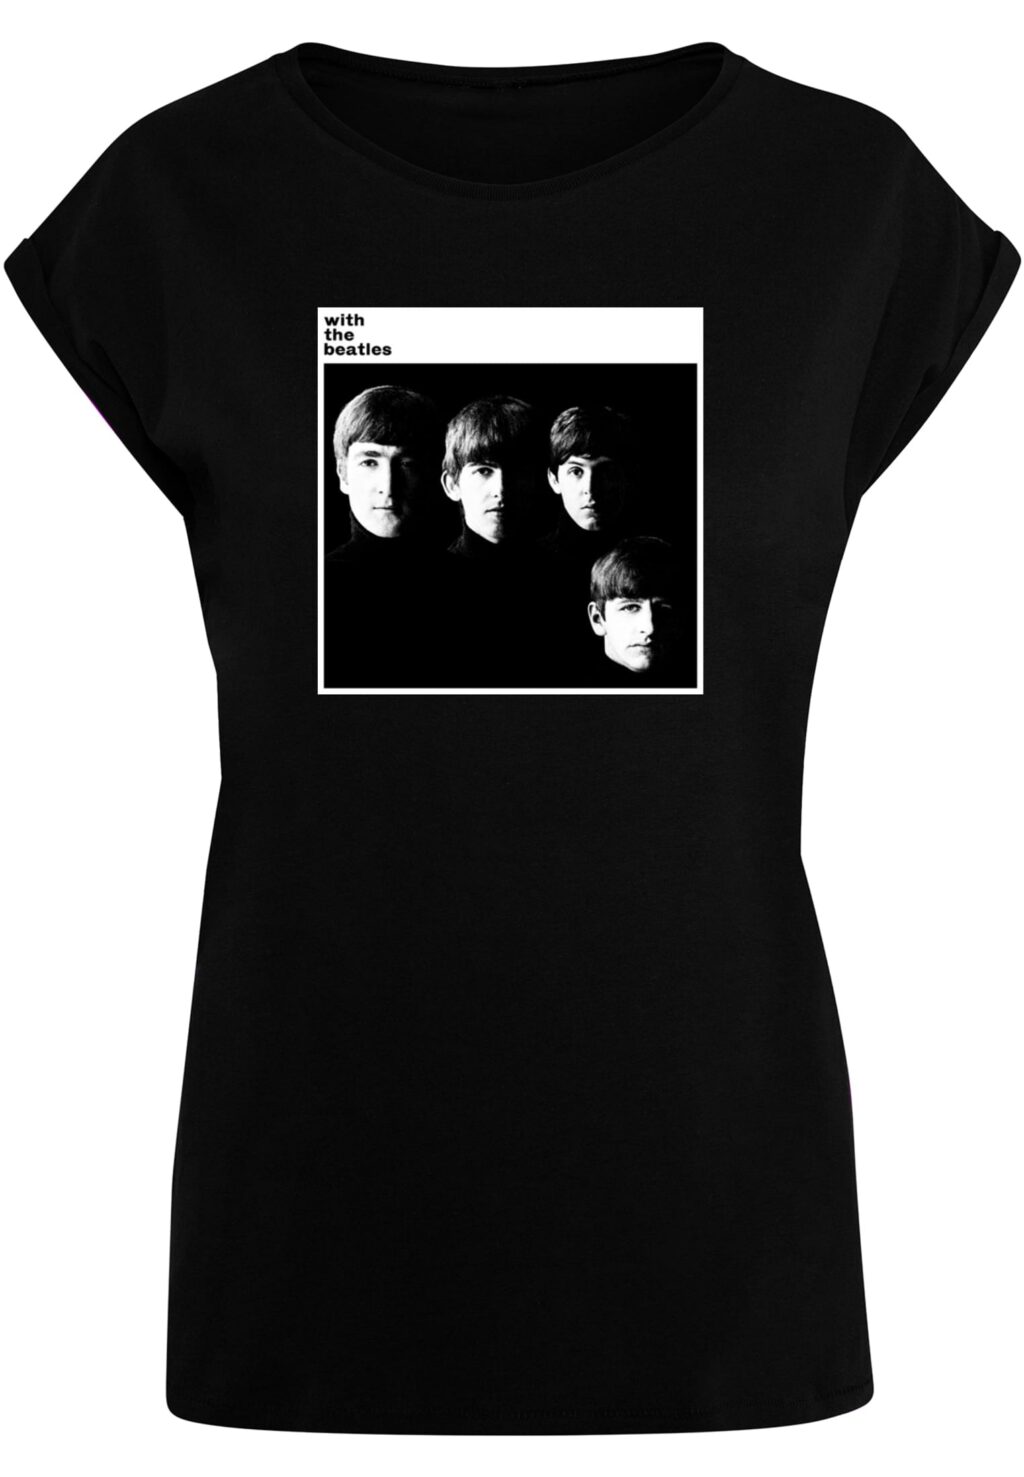 Ladies Beatles - With the Beatles T-Shirt black MP0002831